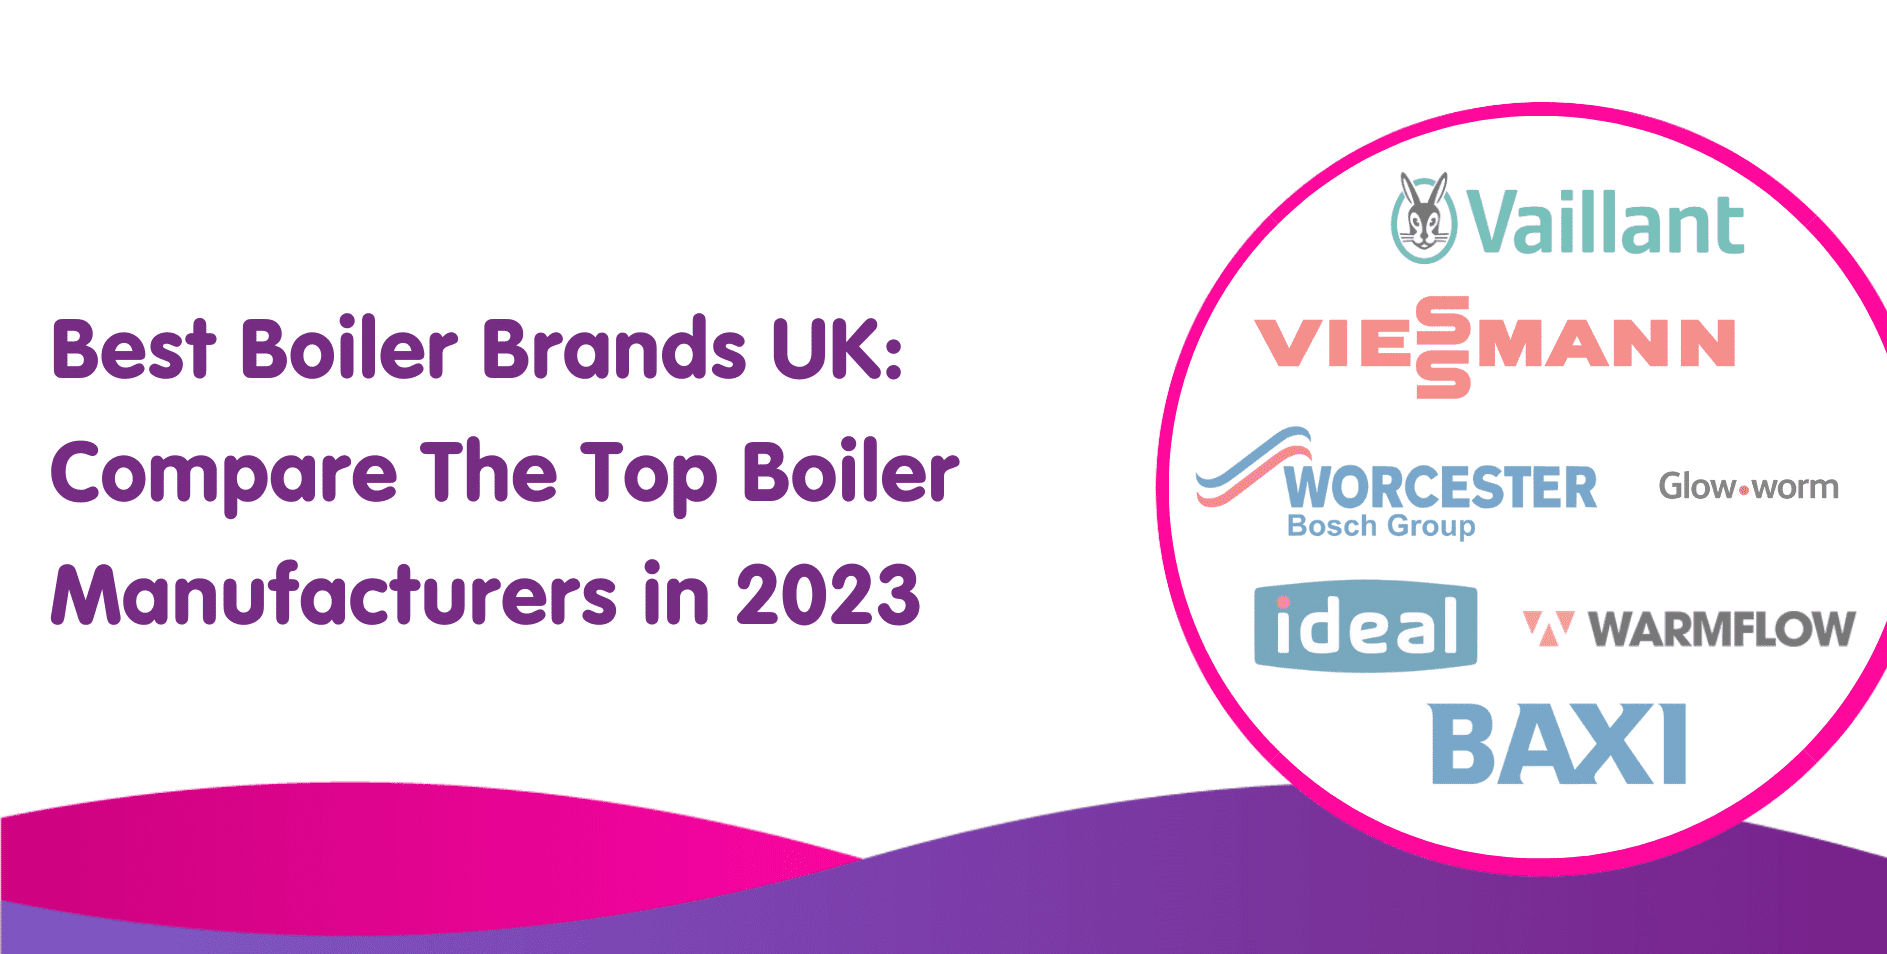 Best Boiler Brands UK: Compare The Top Boiler Manufacturers in 2023